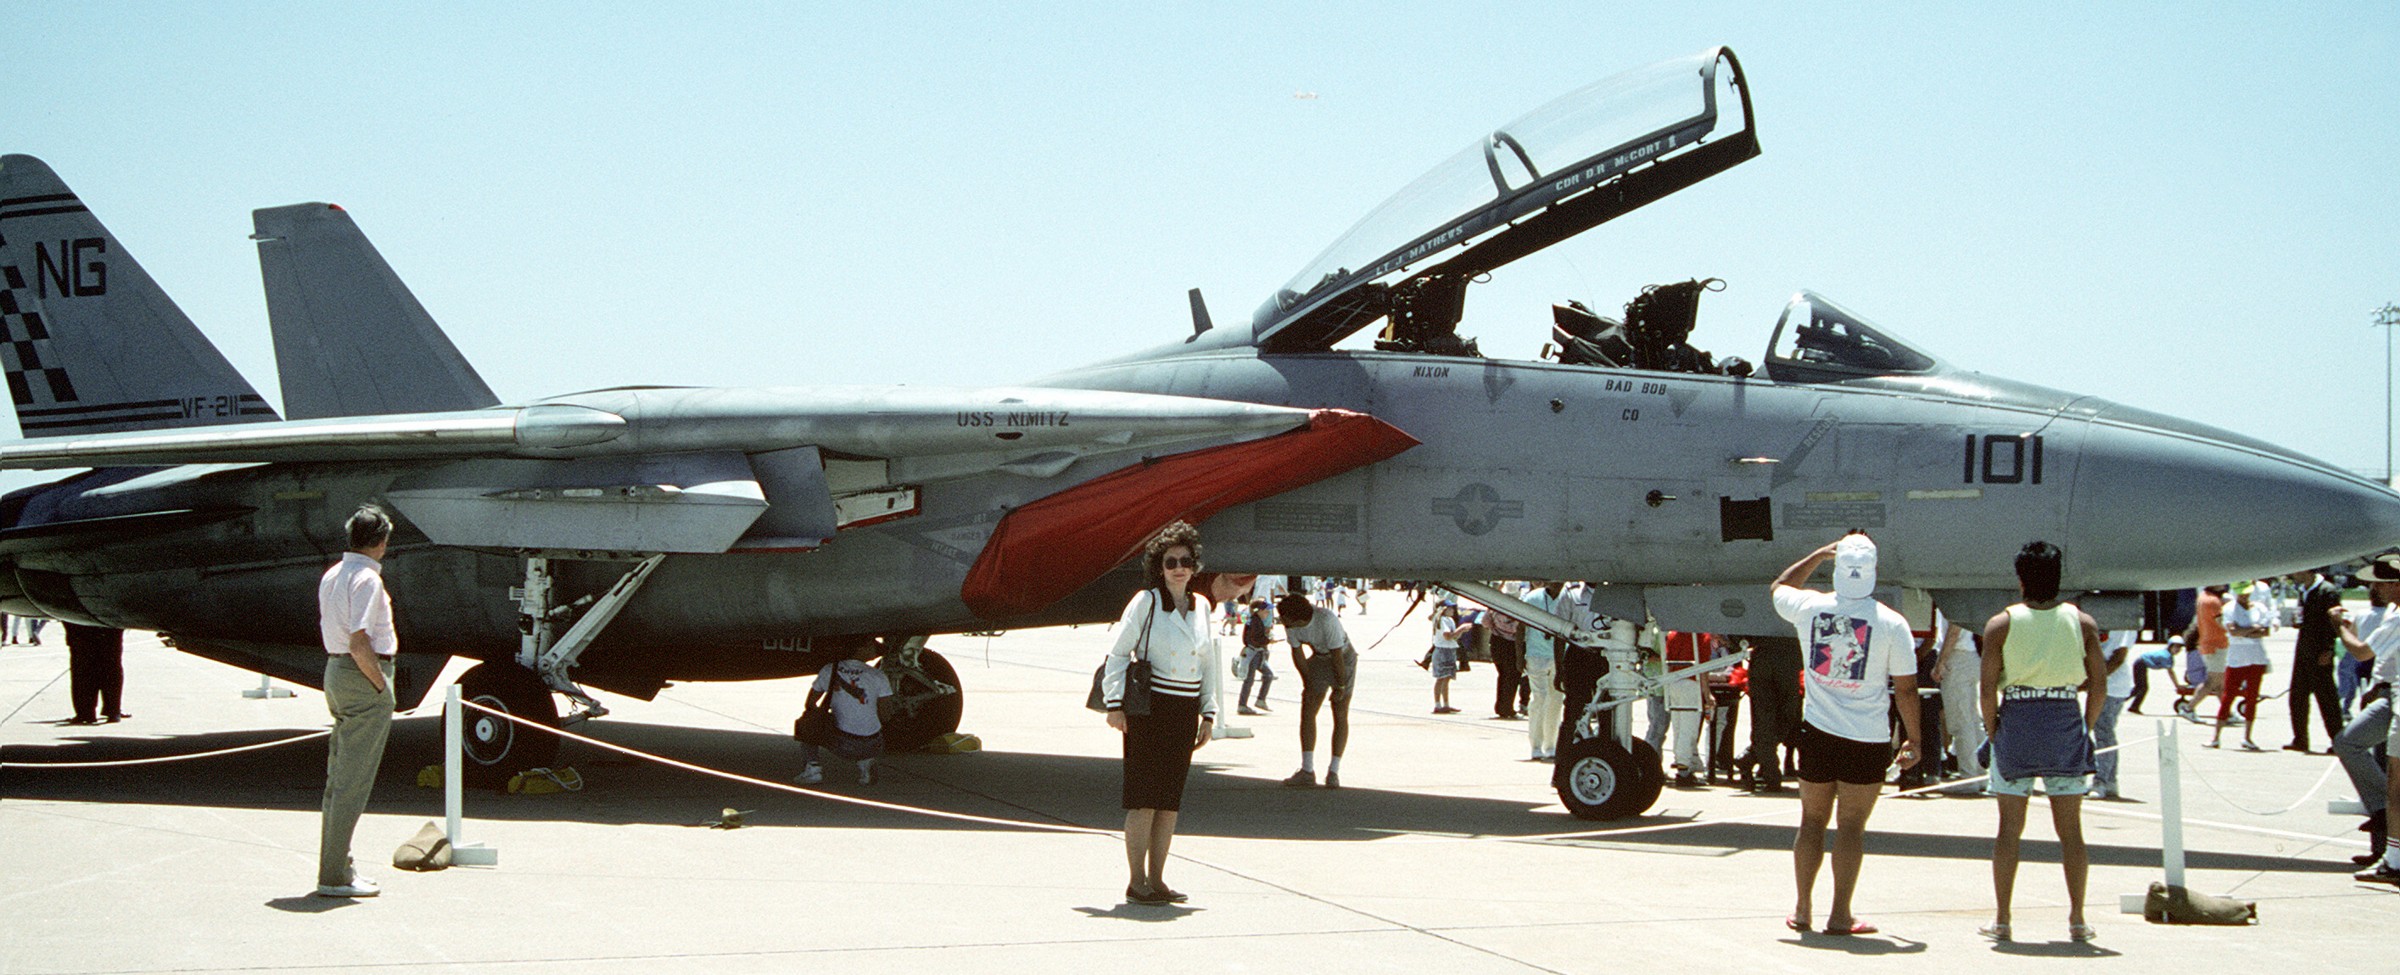 vf-211 fighting checkmates fighter squadron f-14a tomcat us navy carrier air wing cvw-9 uss nimitz cvn-68 93 andrews afb